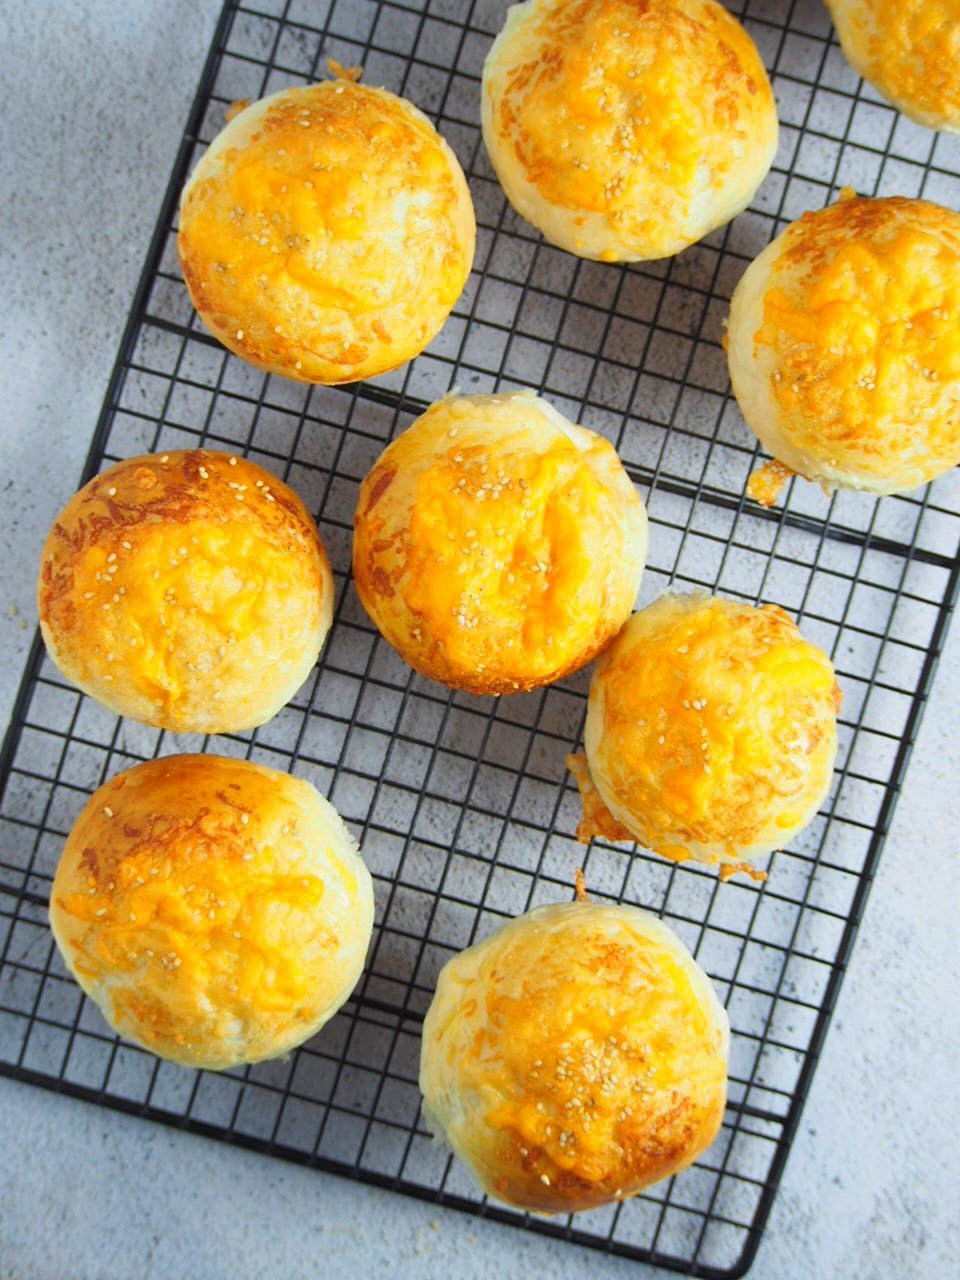 Cheddar cheese buns on a cooling rack.